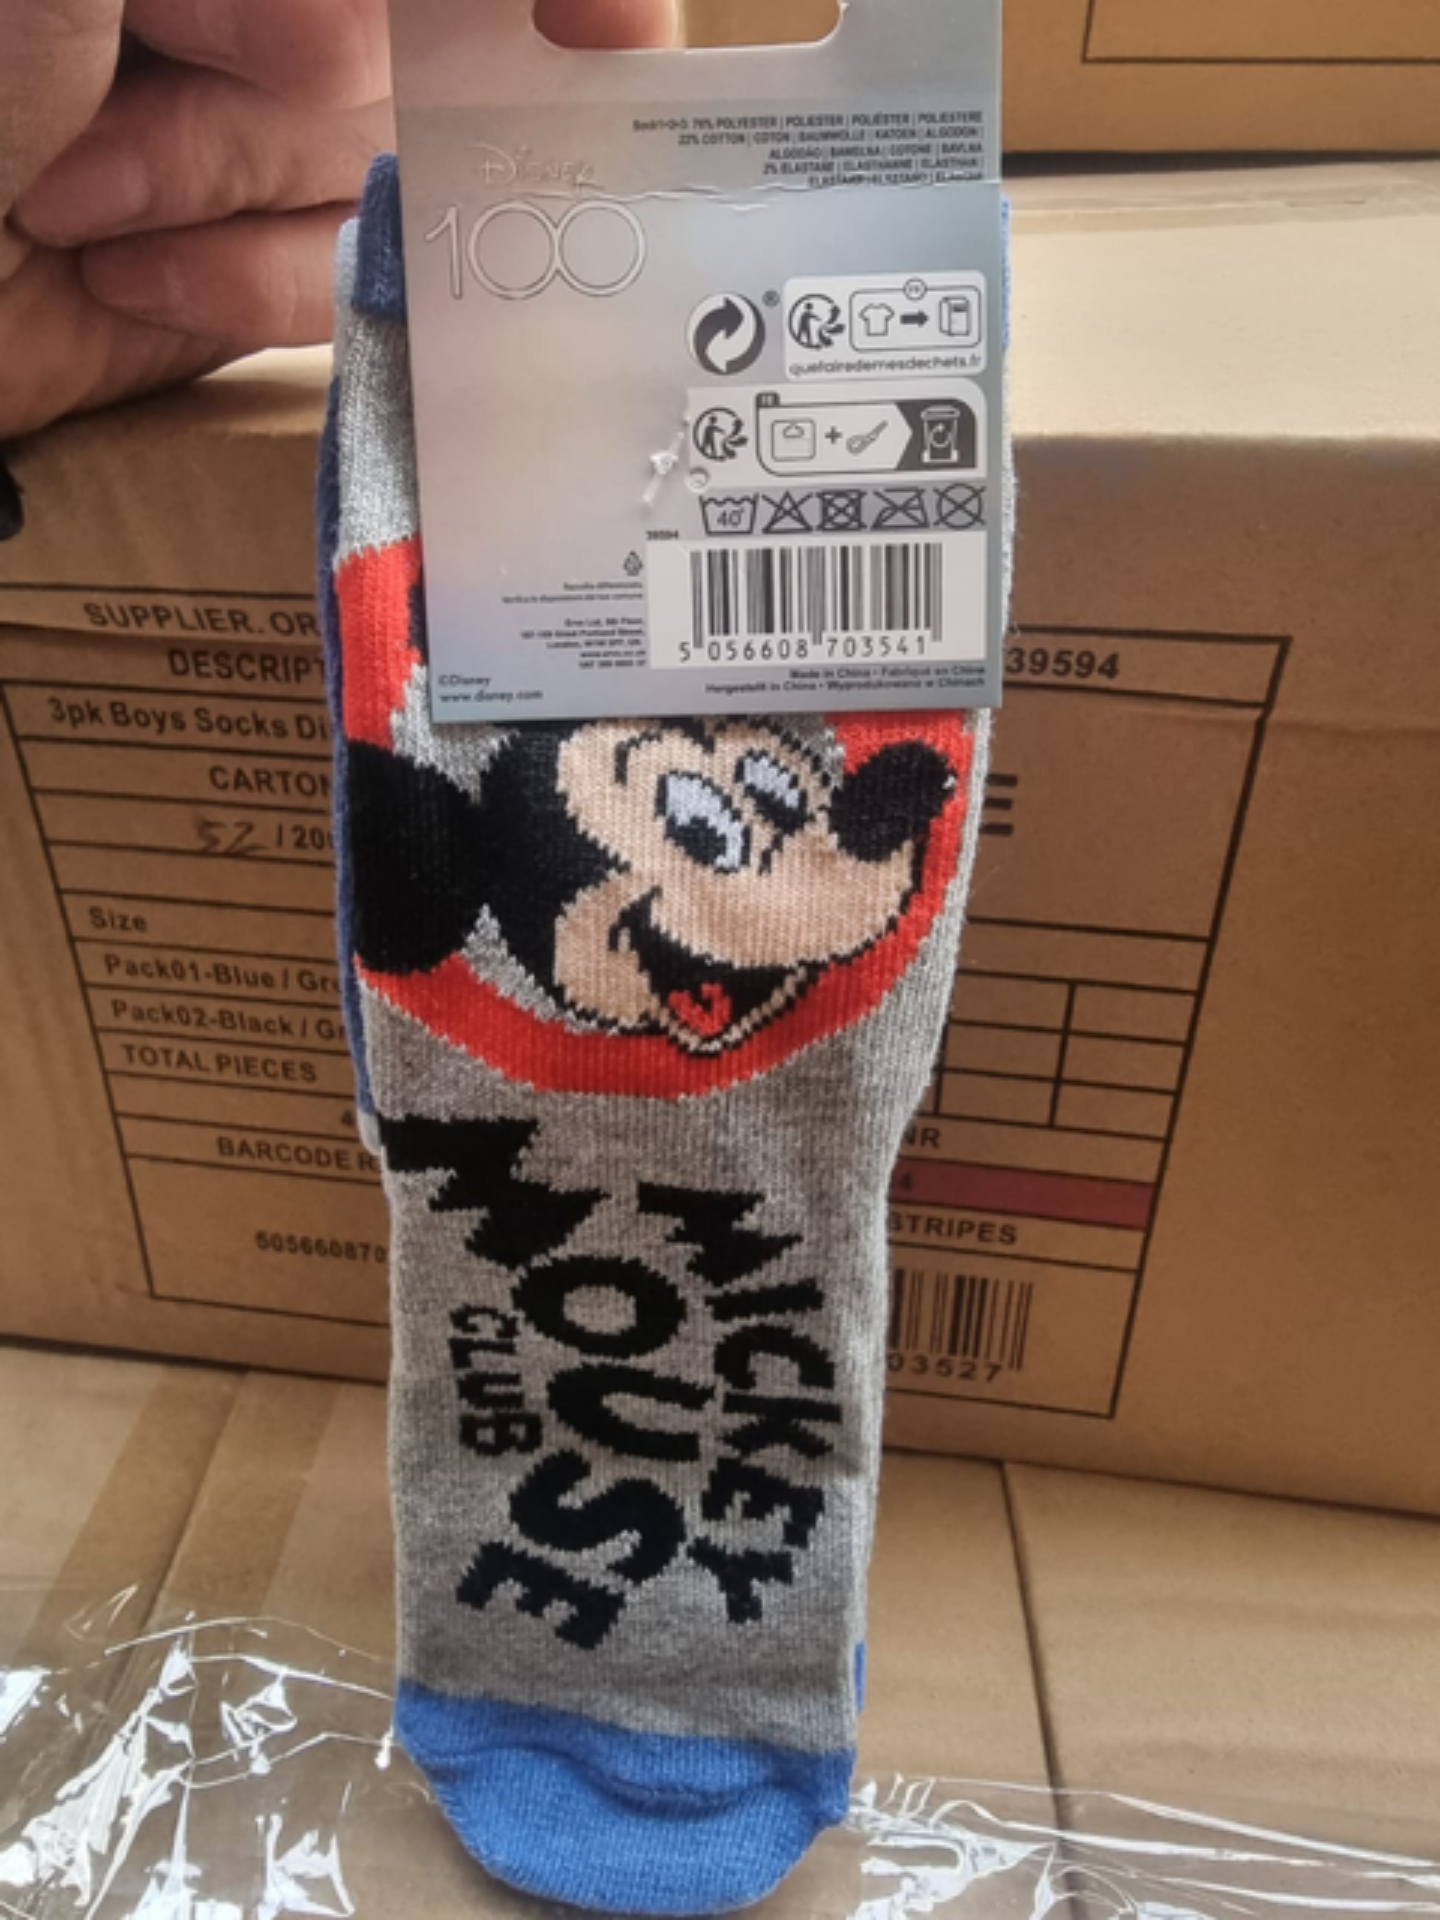 40 x New & Packaged Official Licenced Disney Minnie Mouse Pack of 3 Mixed Socks. Various sized and